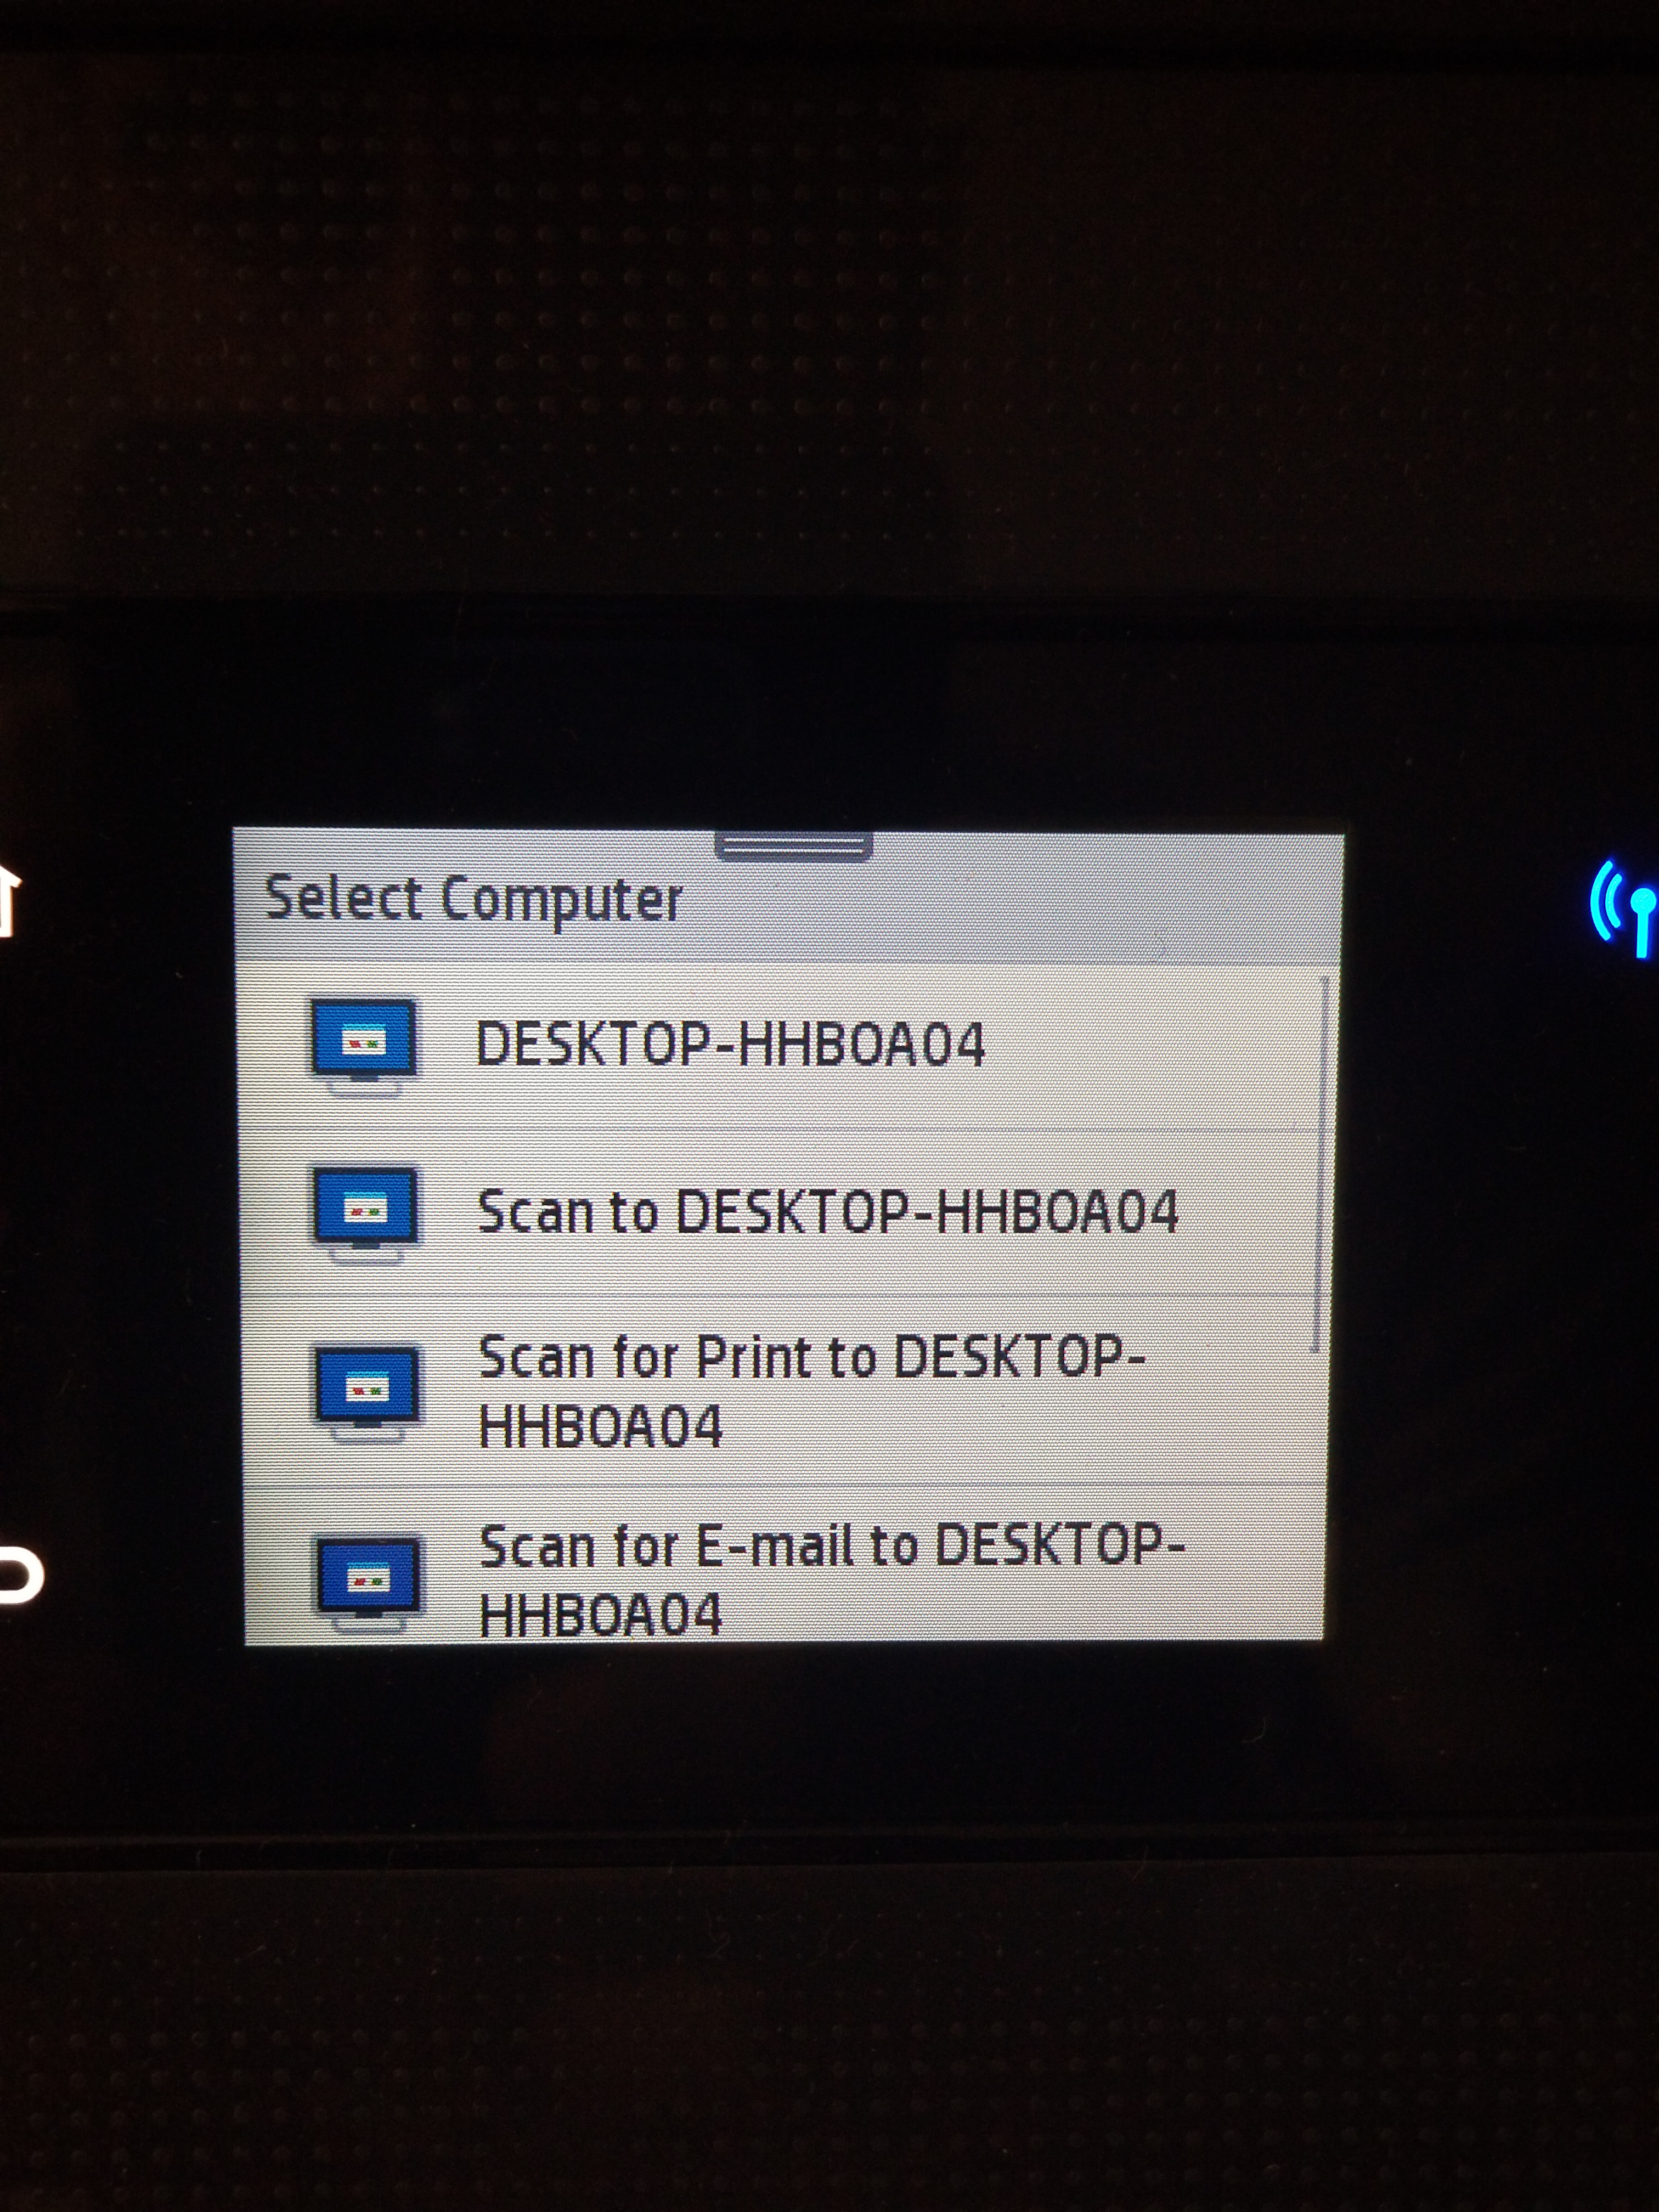 Enabling Scan to PC for Officejet Pro 7740 - HP Support Community - 7555499